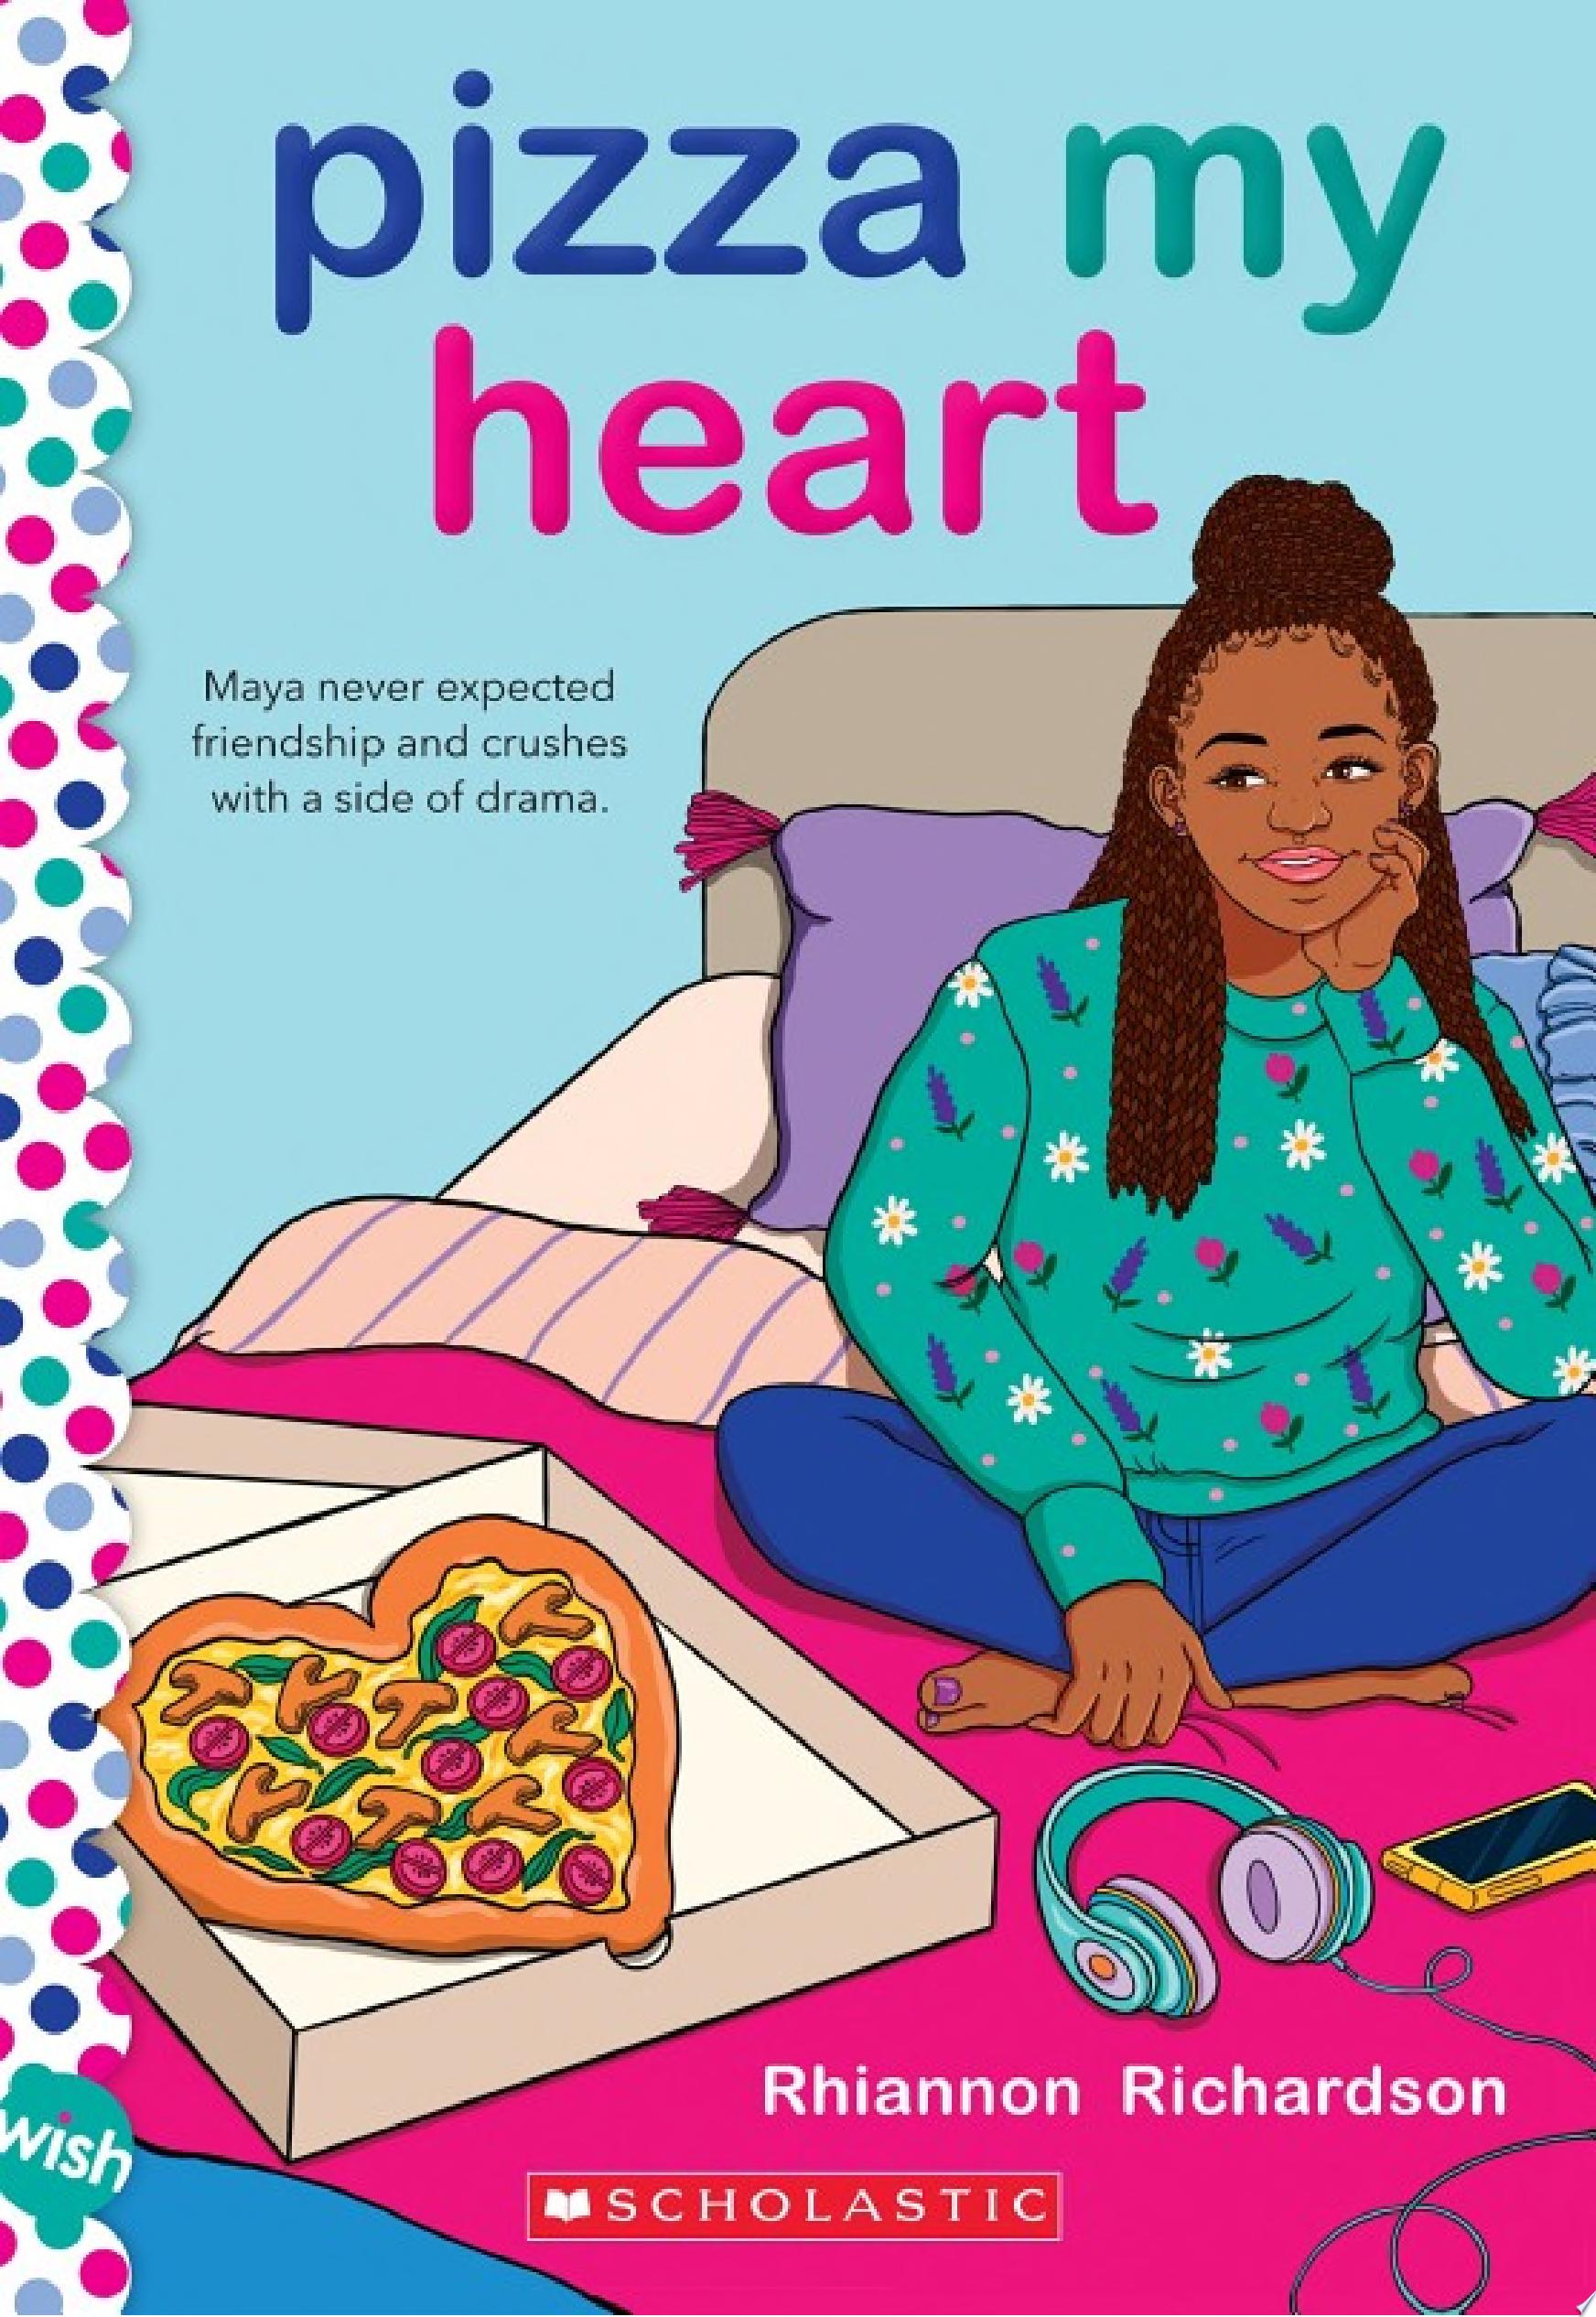 Image for "Pizza My Heart: A Wish Novel"